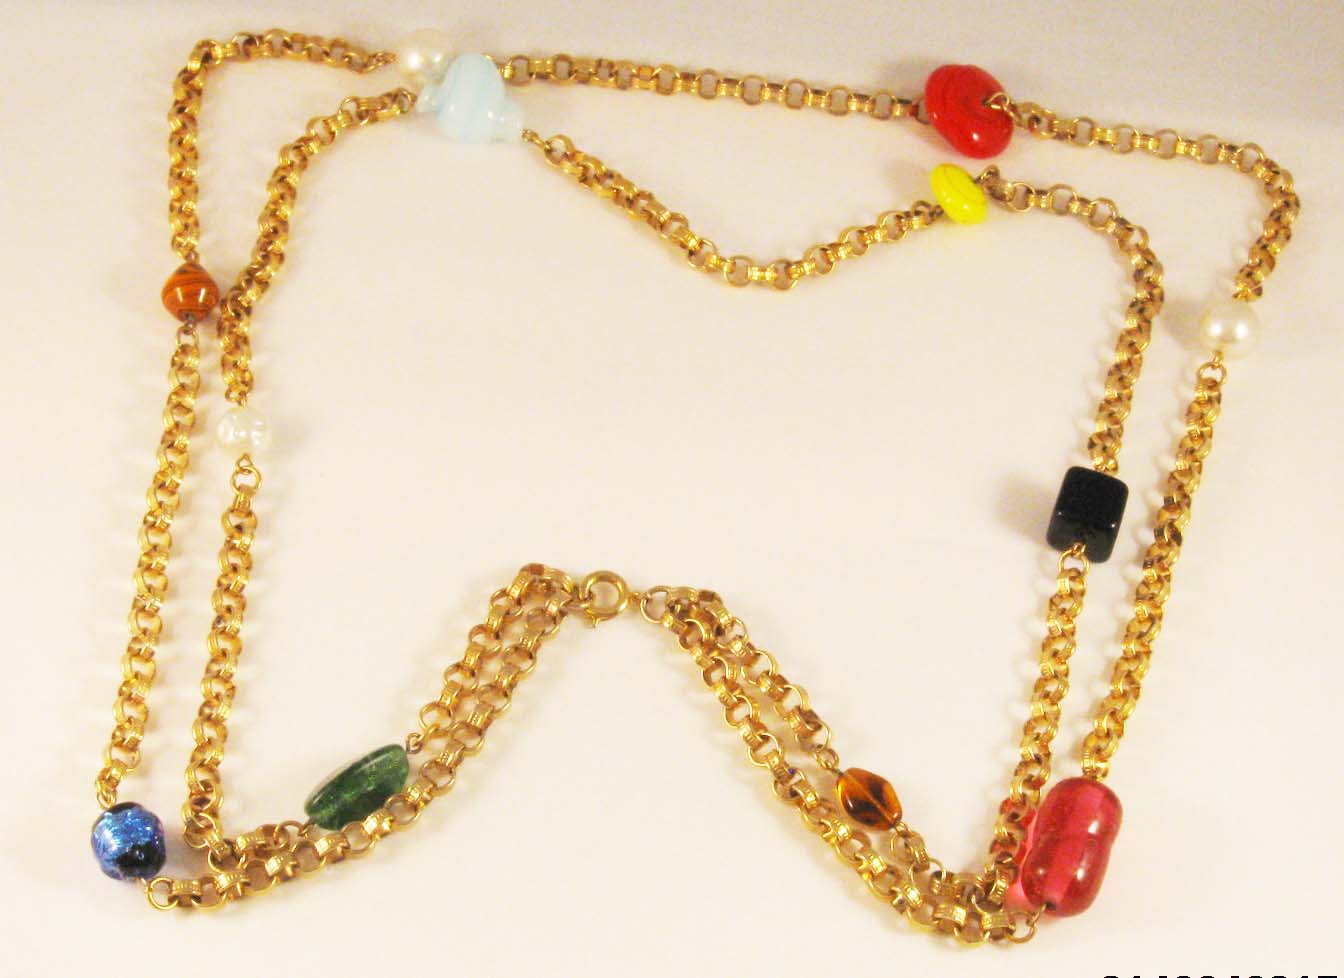 Vintage 28" Double Chain/56" Single Chain with Mixed Stylized Glass Stones and Beads